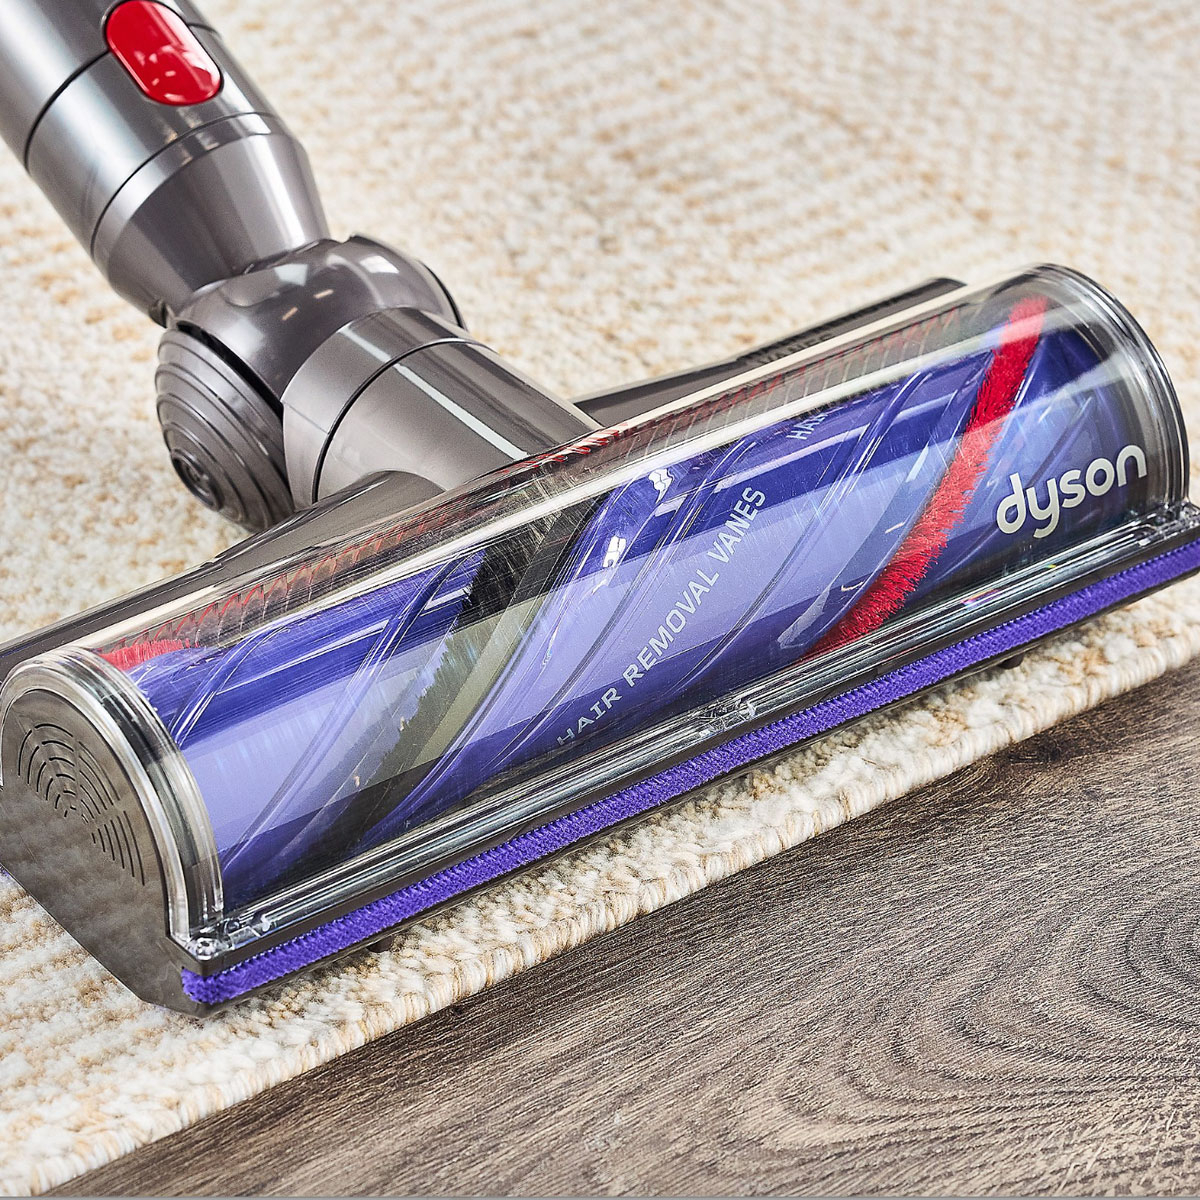 Save $200 on a Dyson Cordless Vacuum and Give Your Home a Deep Clean